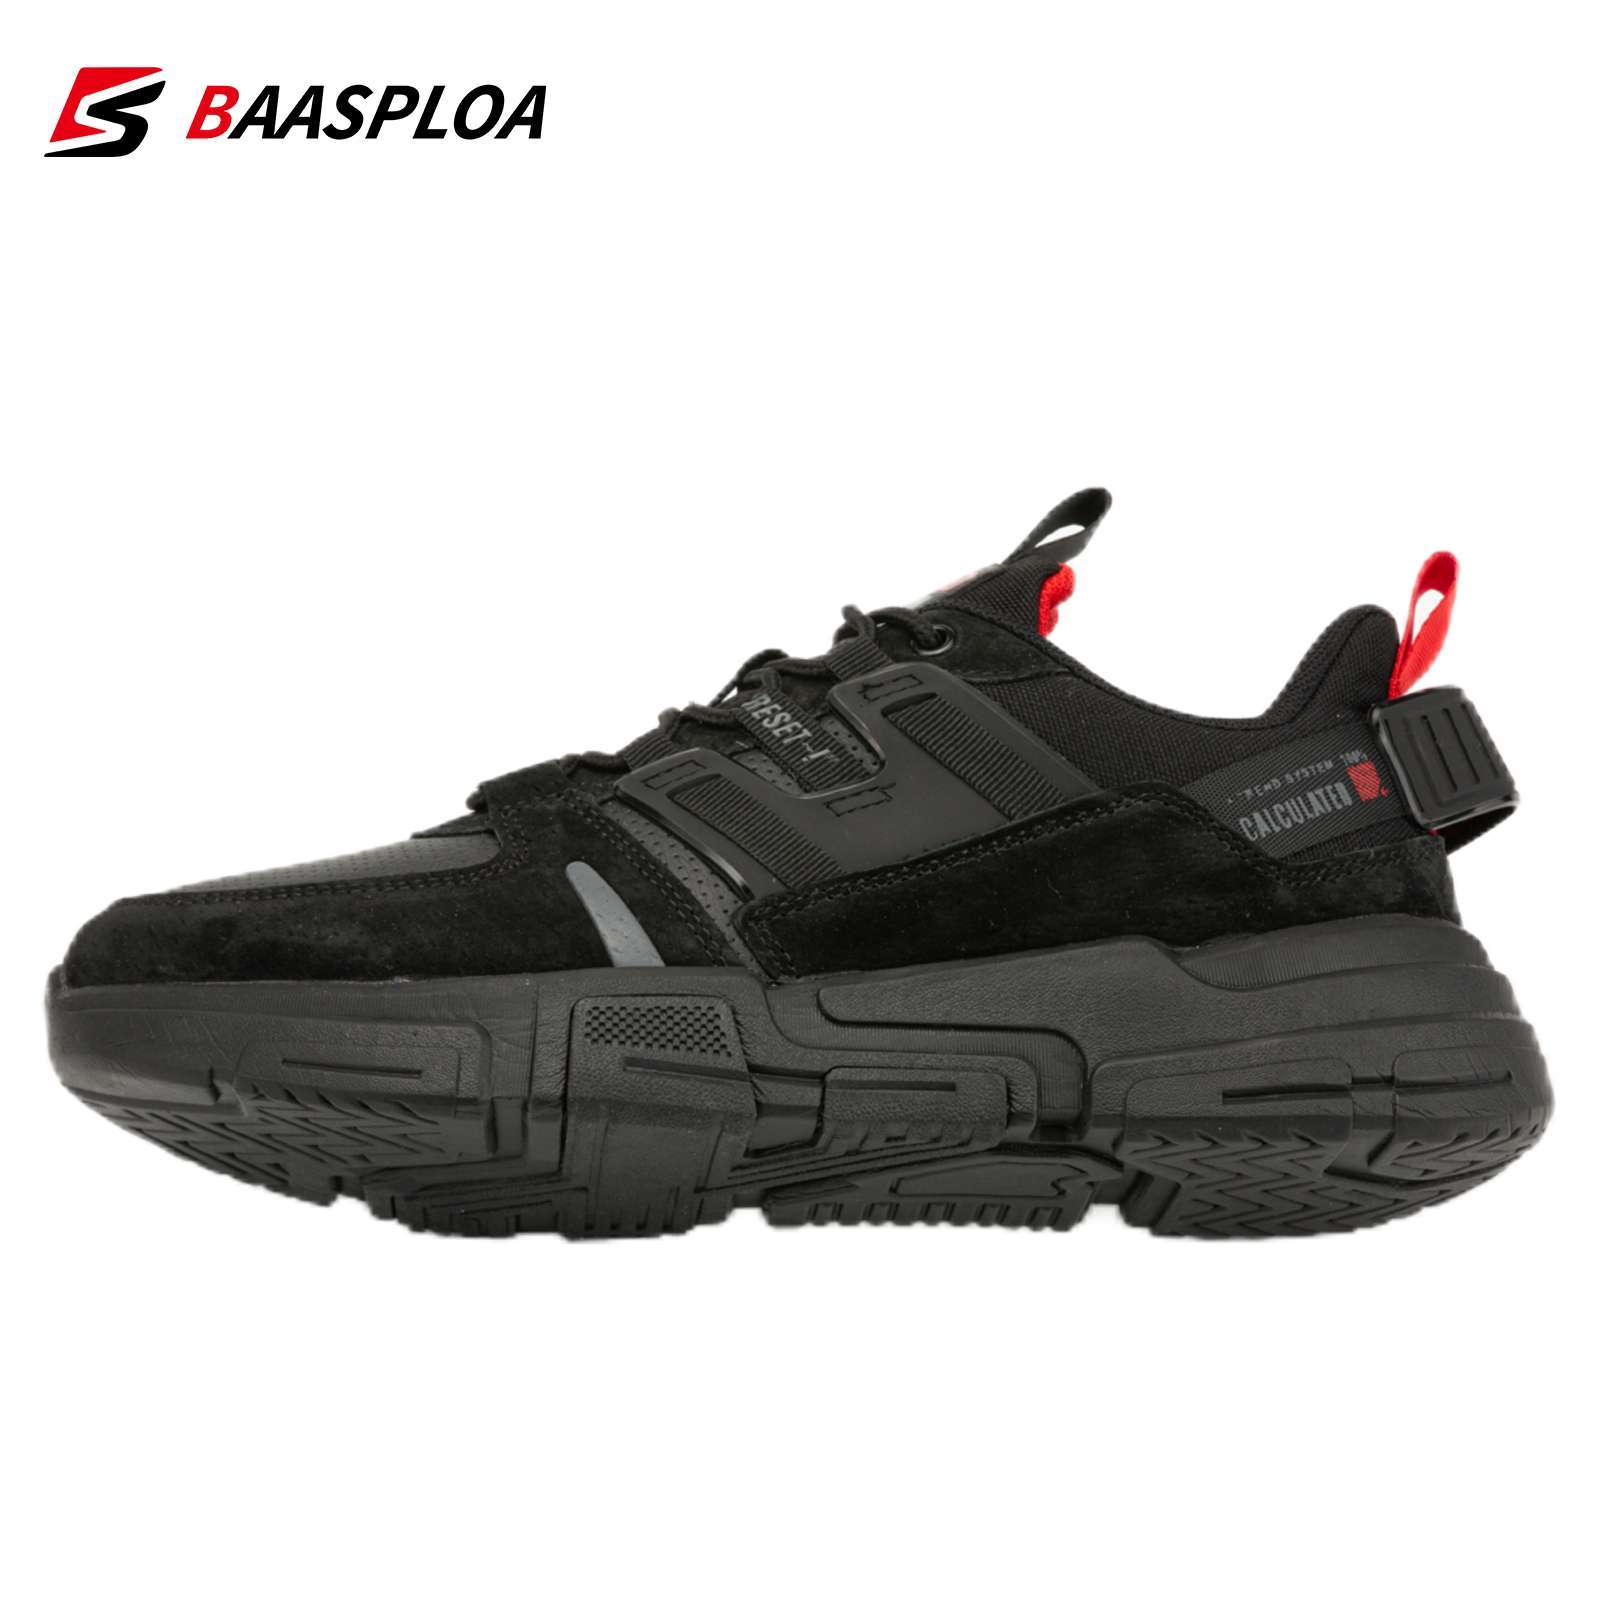 Baasploa Men Sneakers Leather Casual Walking Shoes Non slip Fashion Sneakers Comfortable Male Lace up Tenis 2